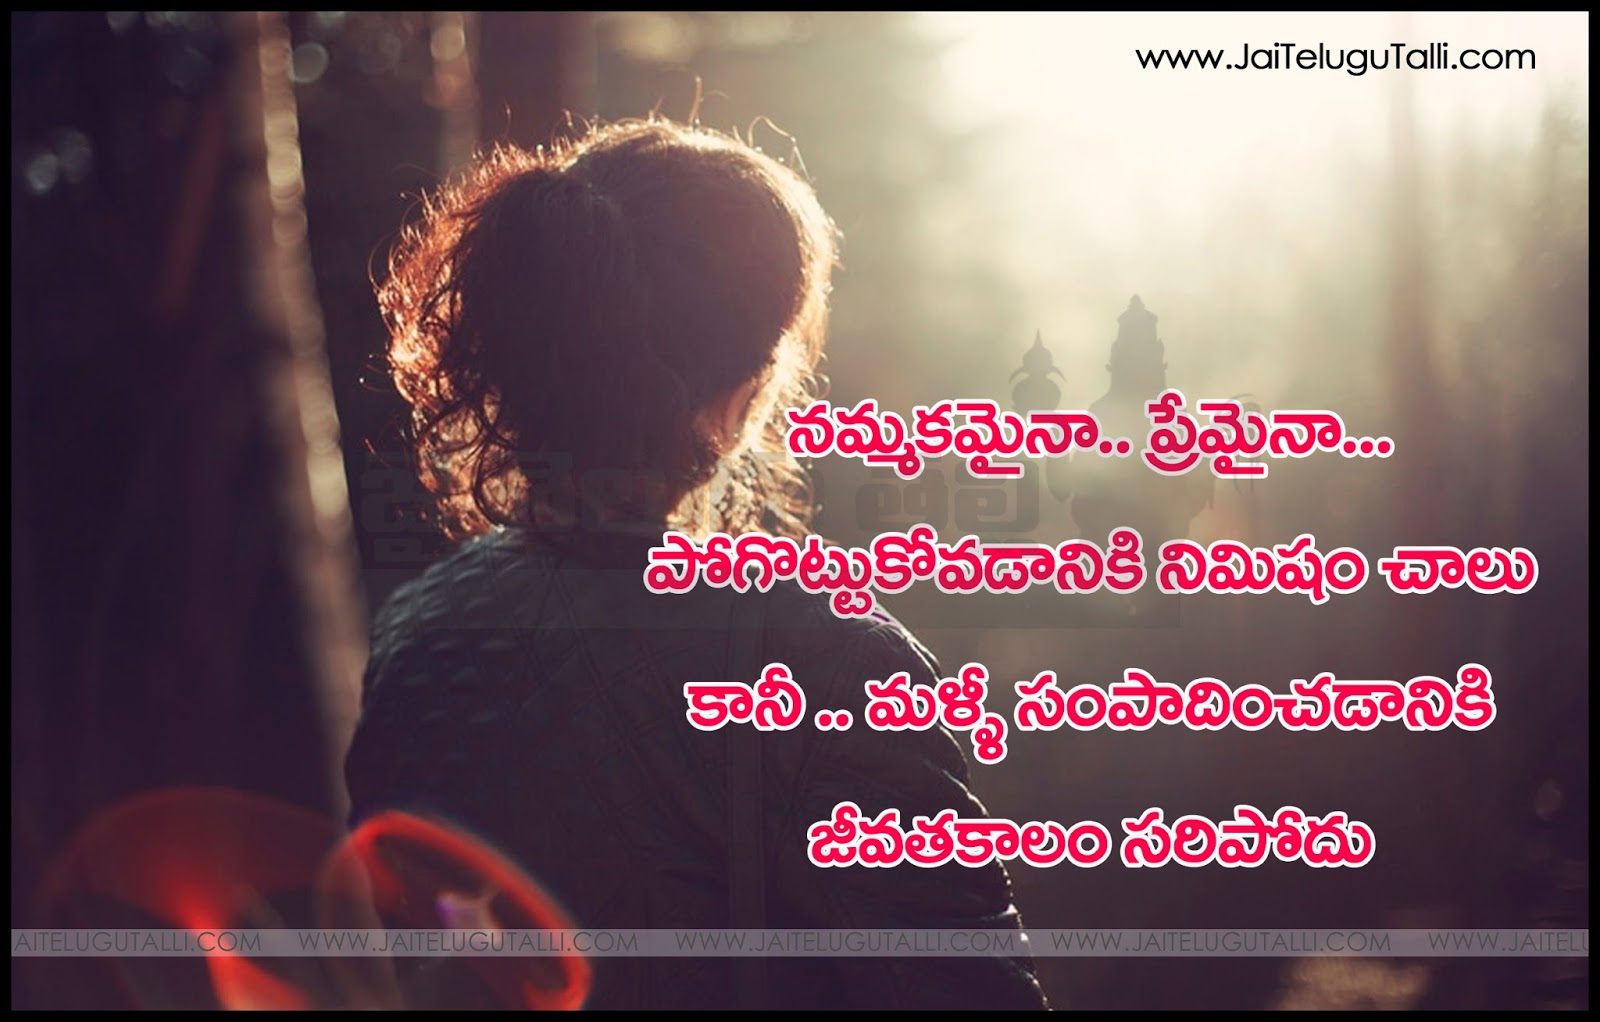 Here is a Telugu Love Quotes Love Thoughts in Telugu Best Love Thoughts and